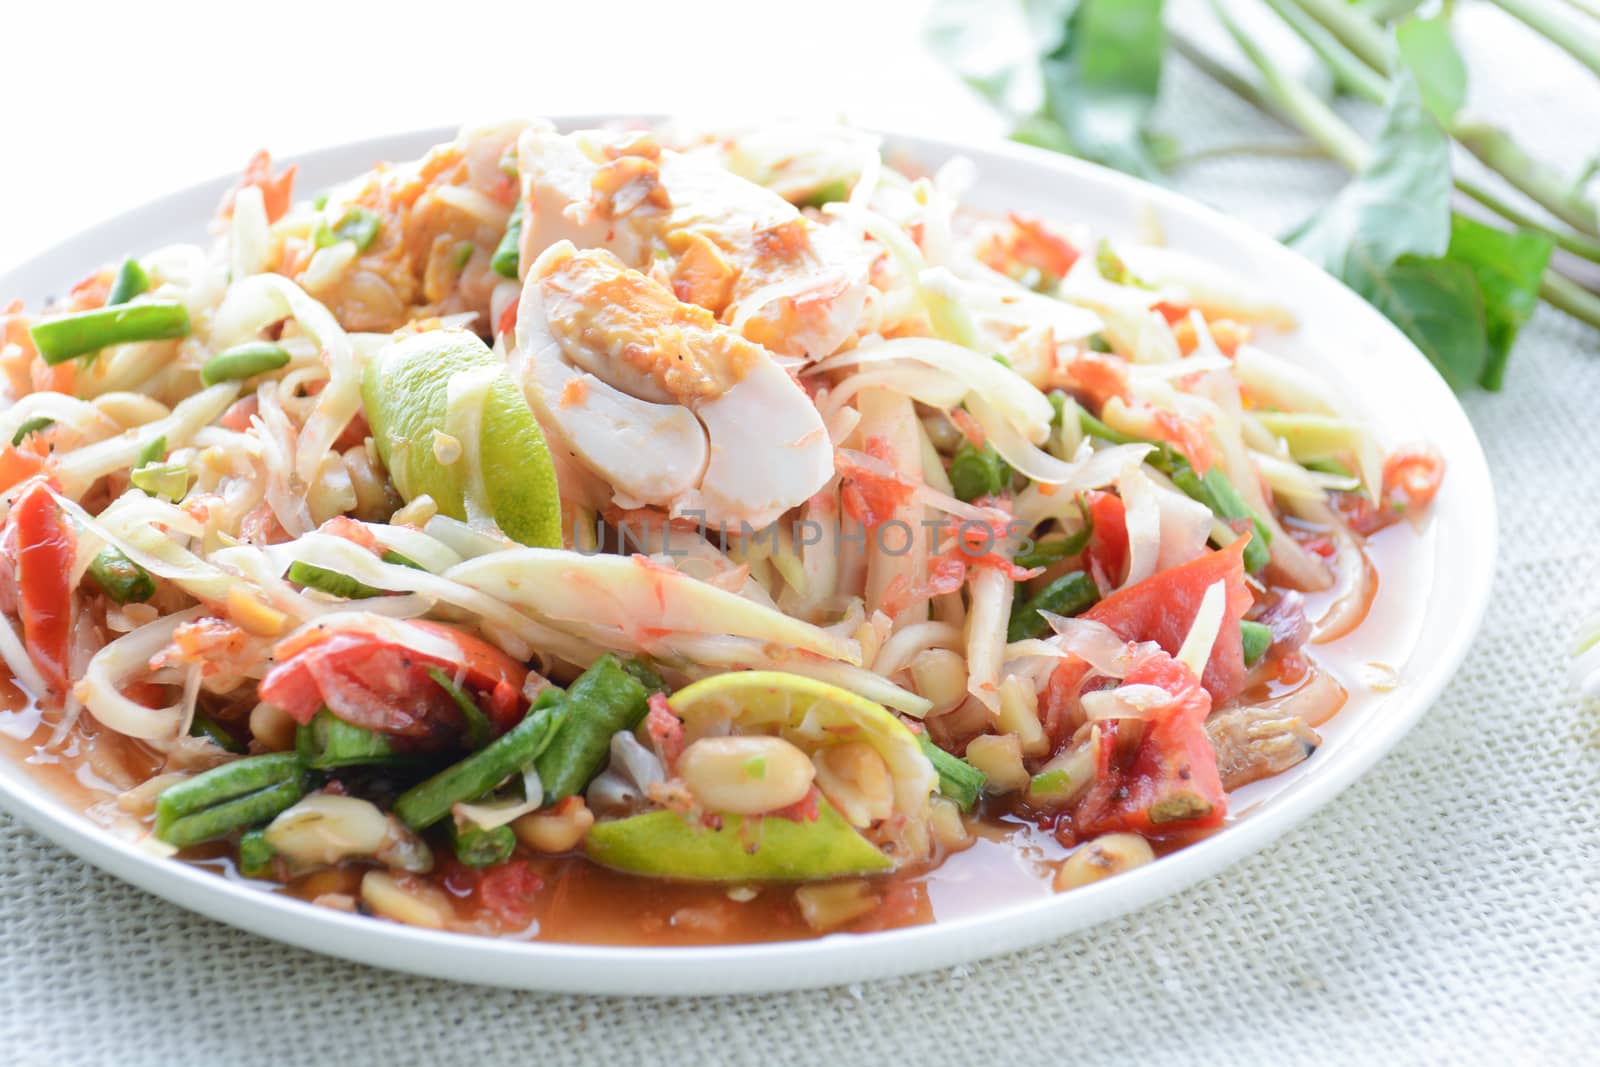 Papaya Salad with Satled Eggs, Pound chilies and garlic then place sliced tomato, eggplant and salted egg. Add fish sauce, lemon, sugar, chopped papaya then mixed all the ingredients together.
